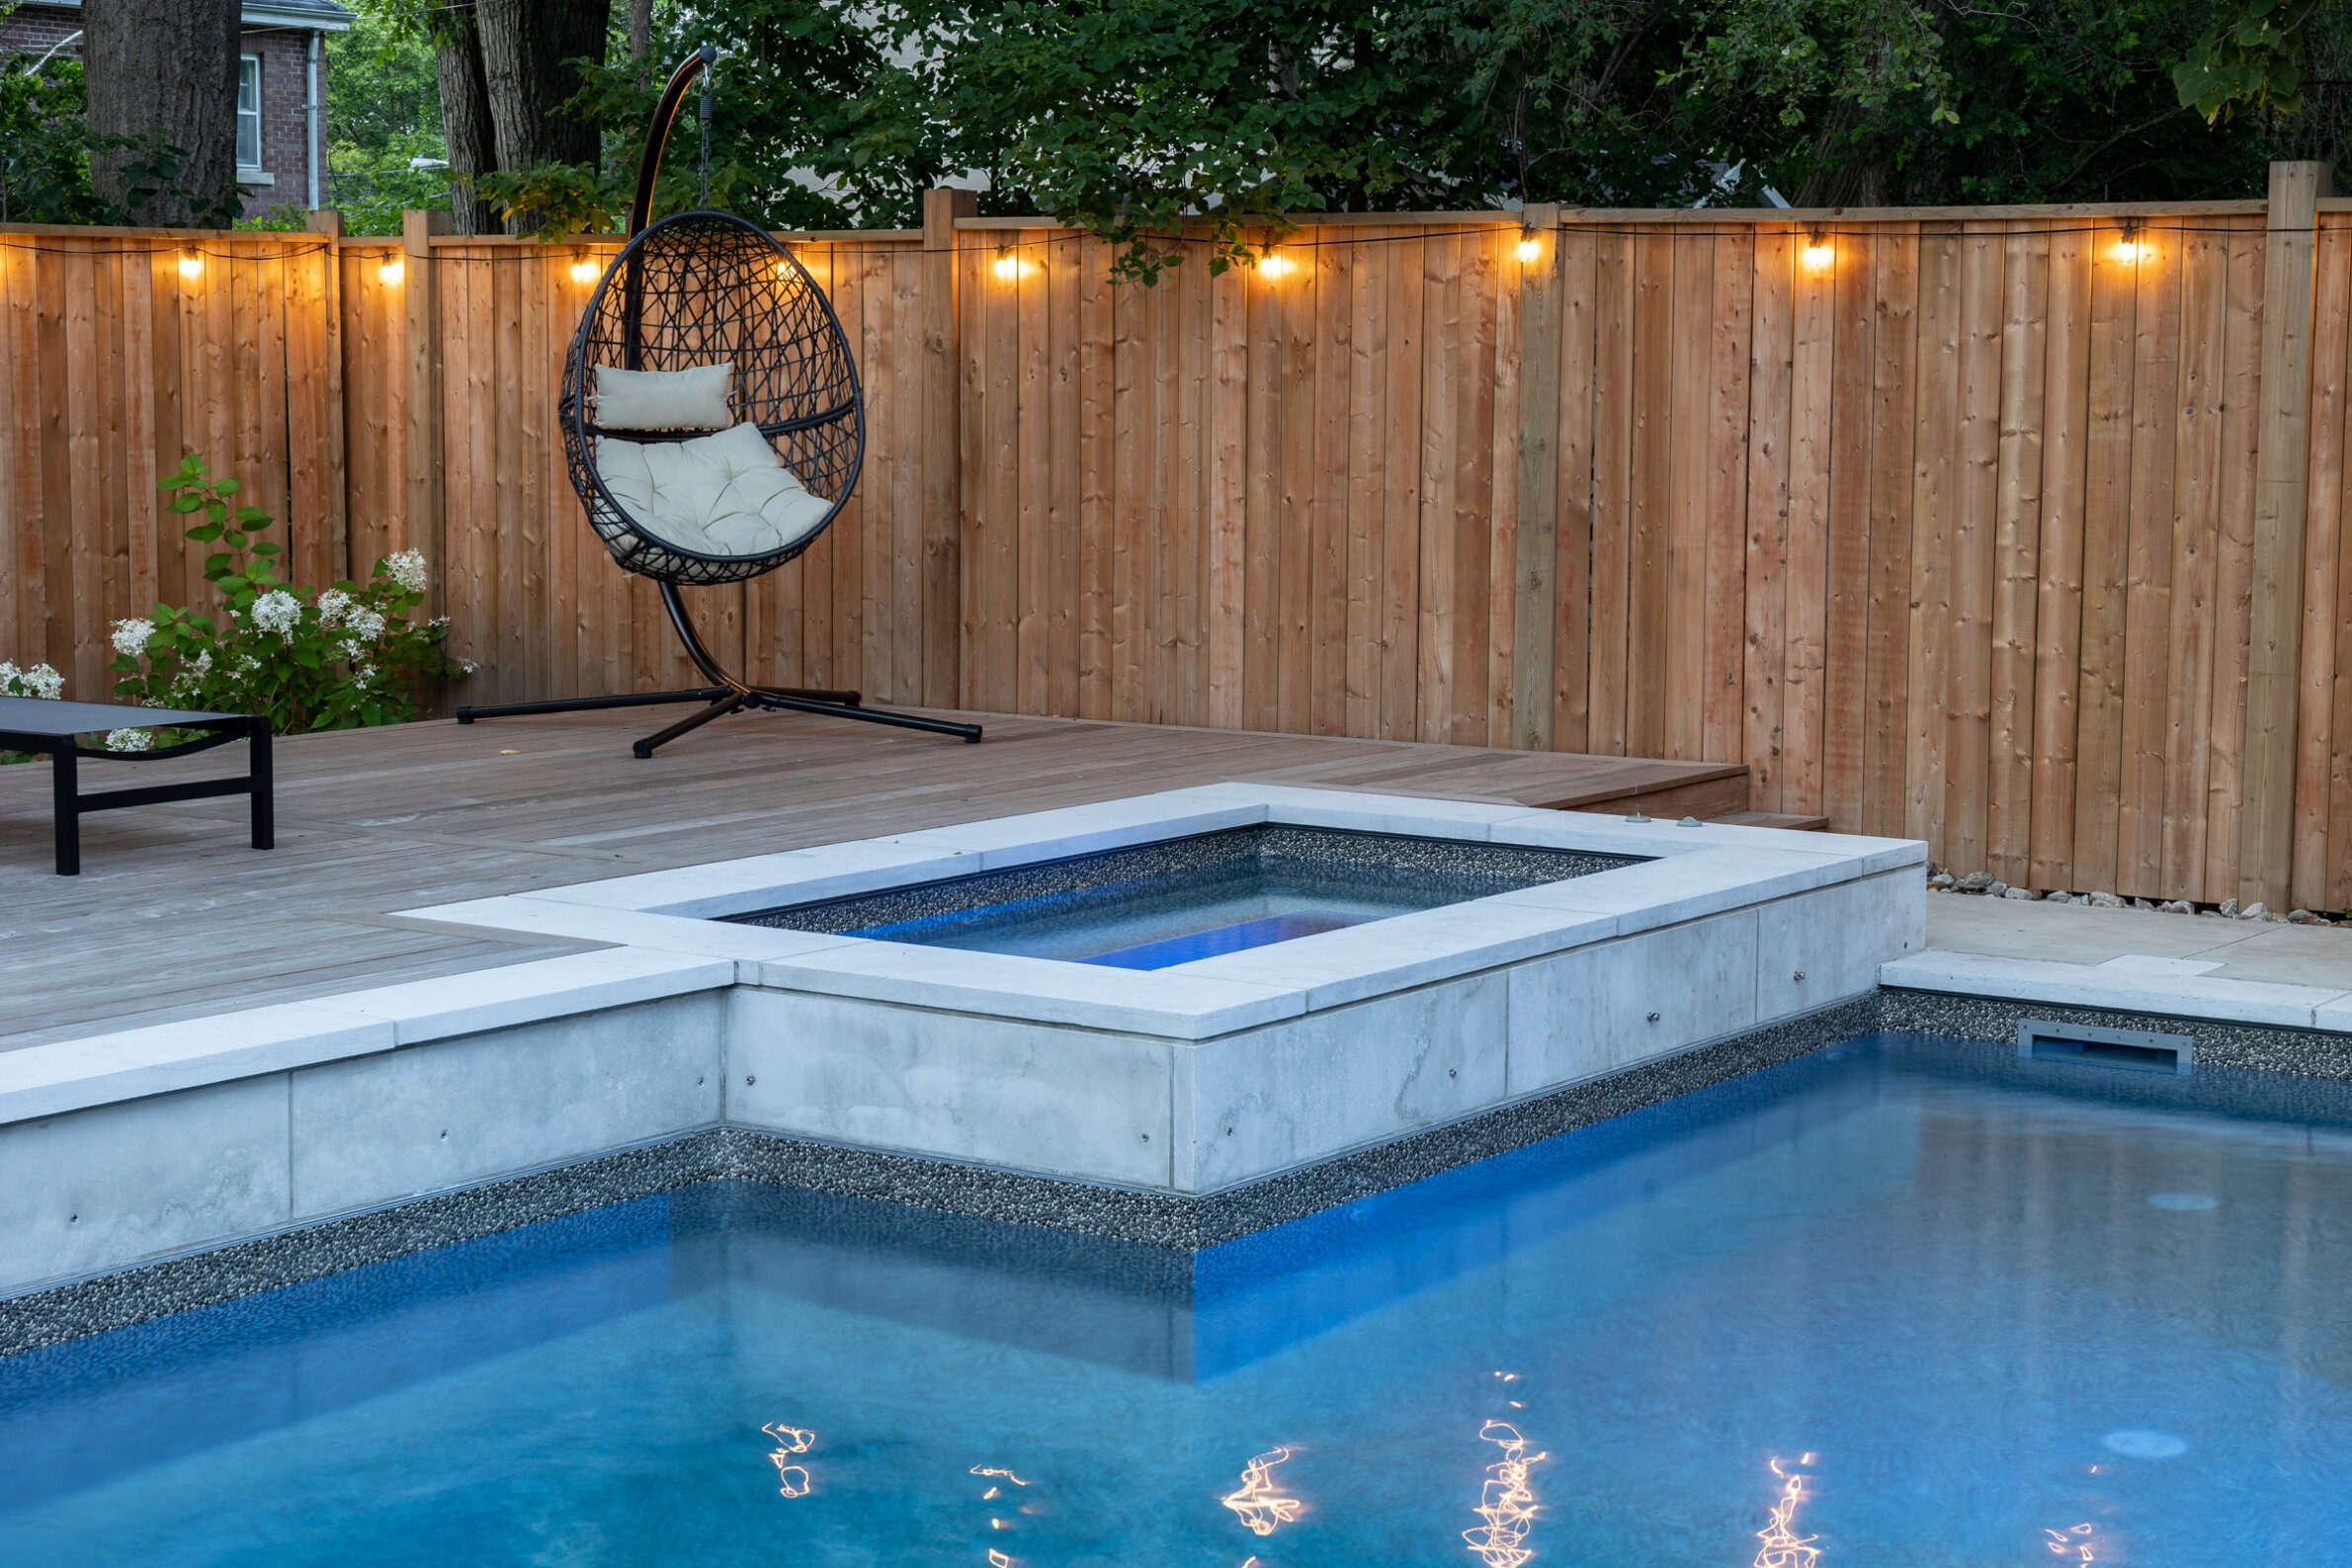 An outdoor area featuring a swimming pool with blue water, surrounded by a deck, a hanging chair, and a wooden fence with string lights.